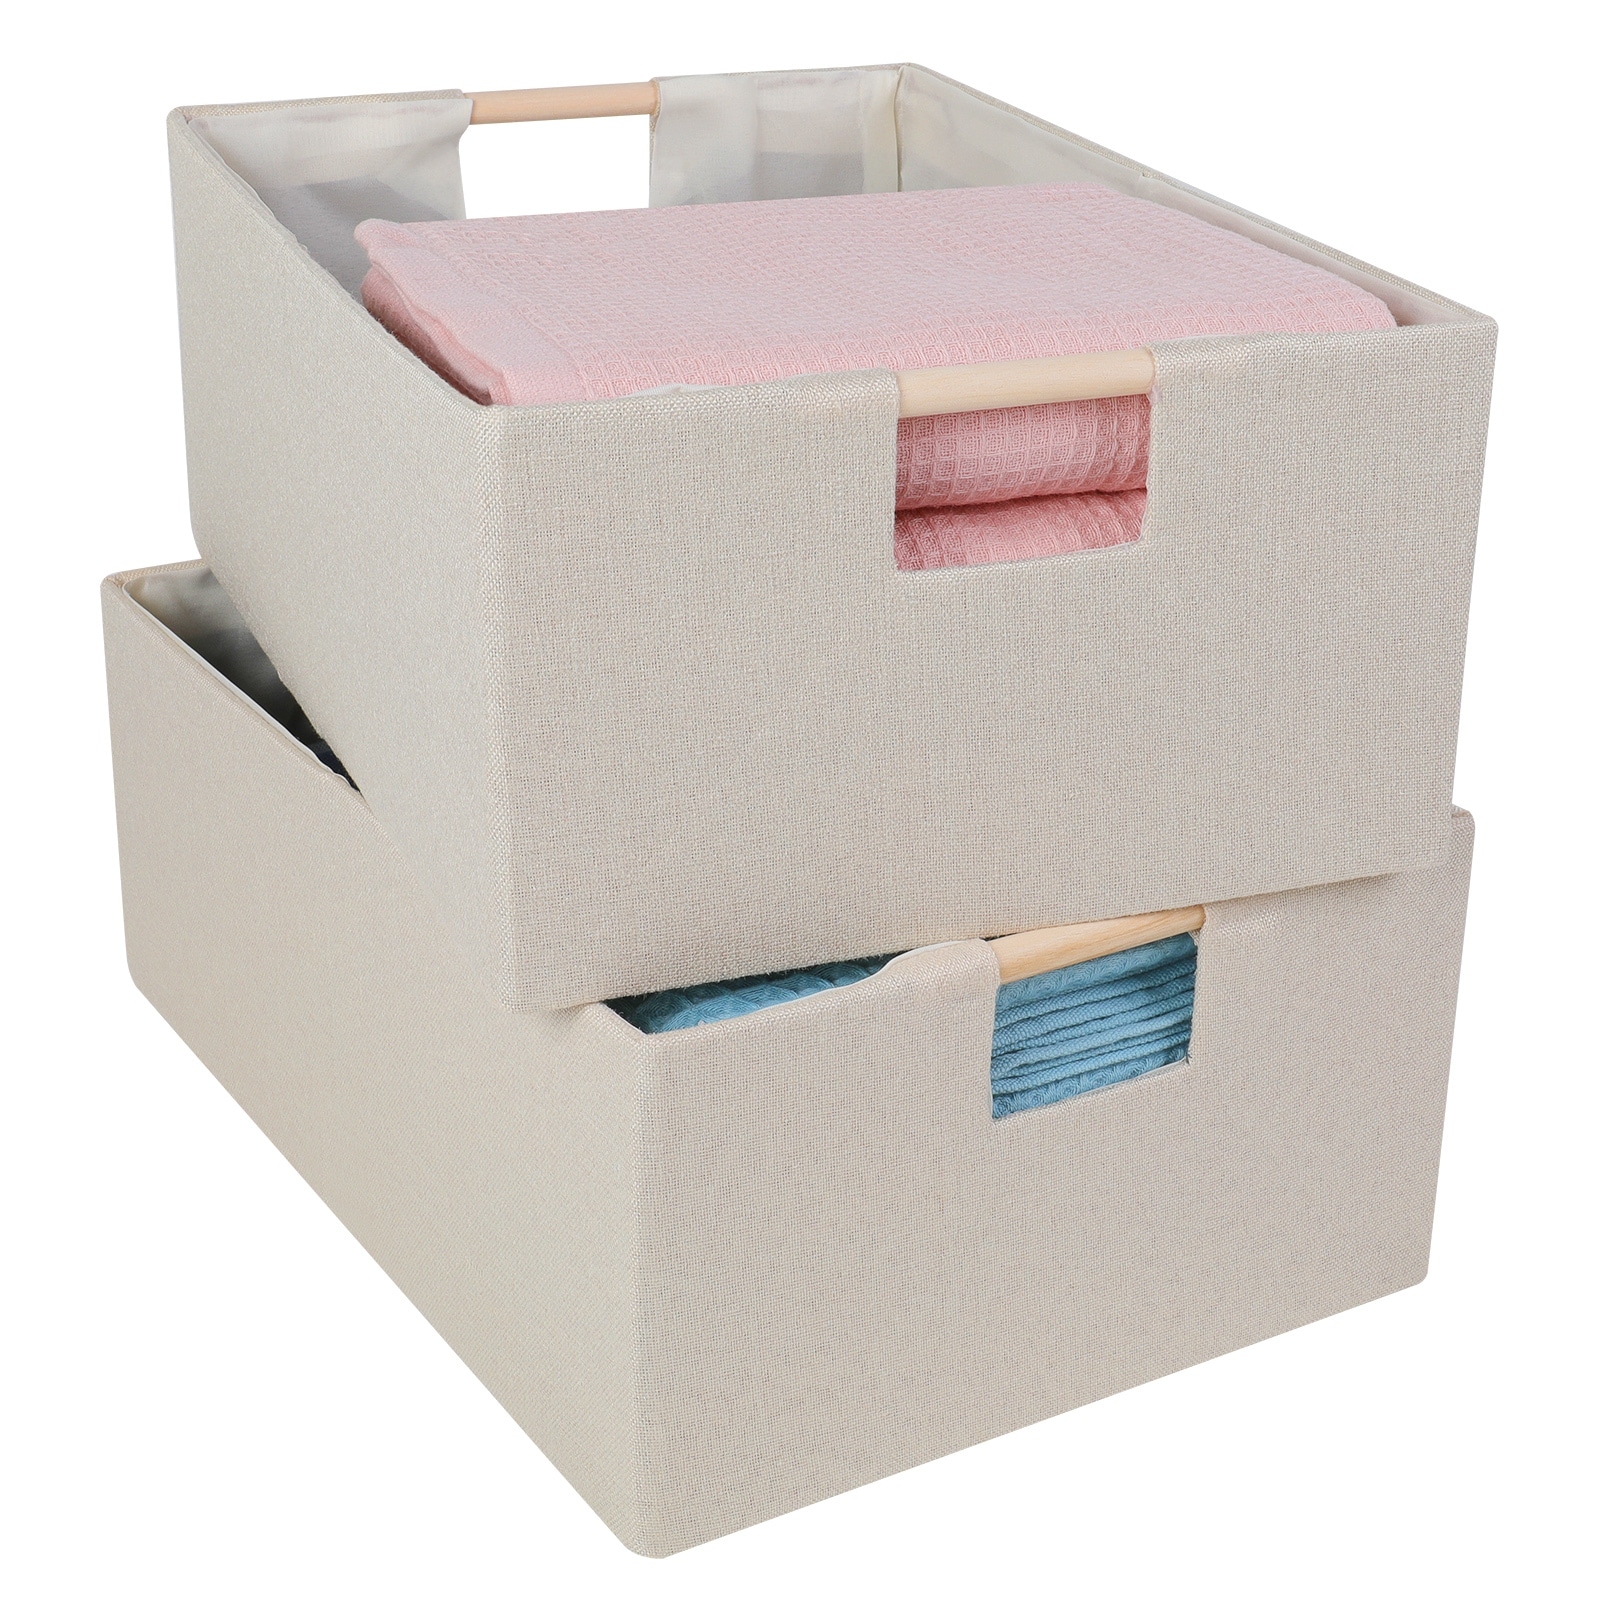 https://ak1.ostkcdn.com/images/products/is/images/direct/b439f8943dbf31dc3b811425392a91a7ed306b93/Fabric-Foldable-Storage-Bins-Organizer-Container-W-Wood-Handles-2Pcs.jpg